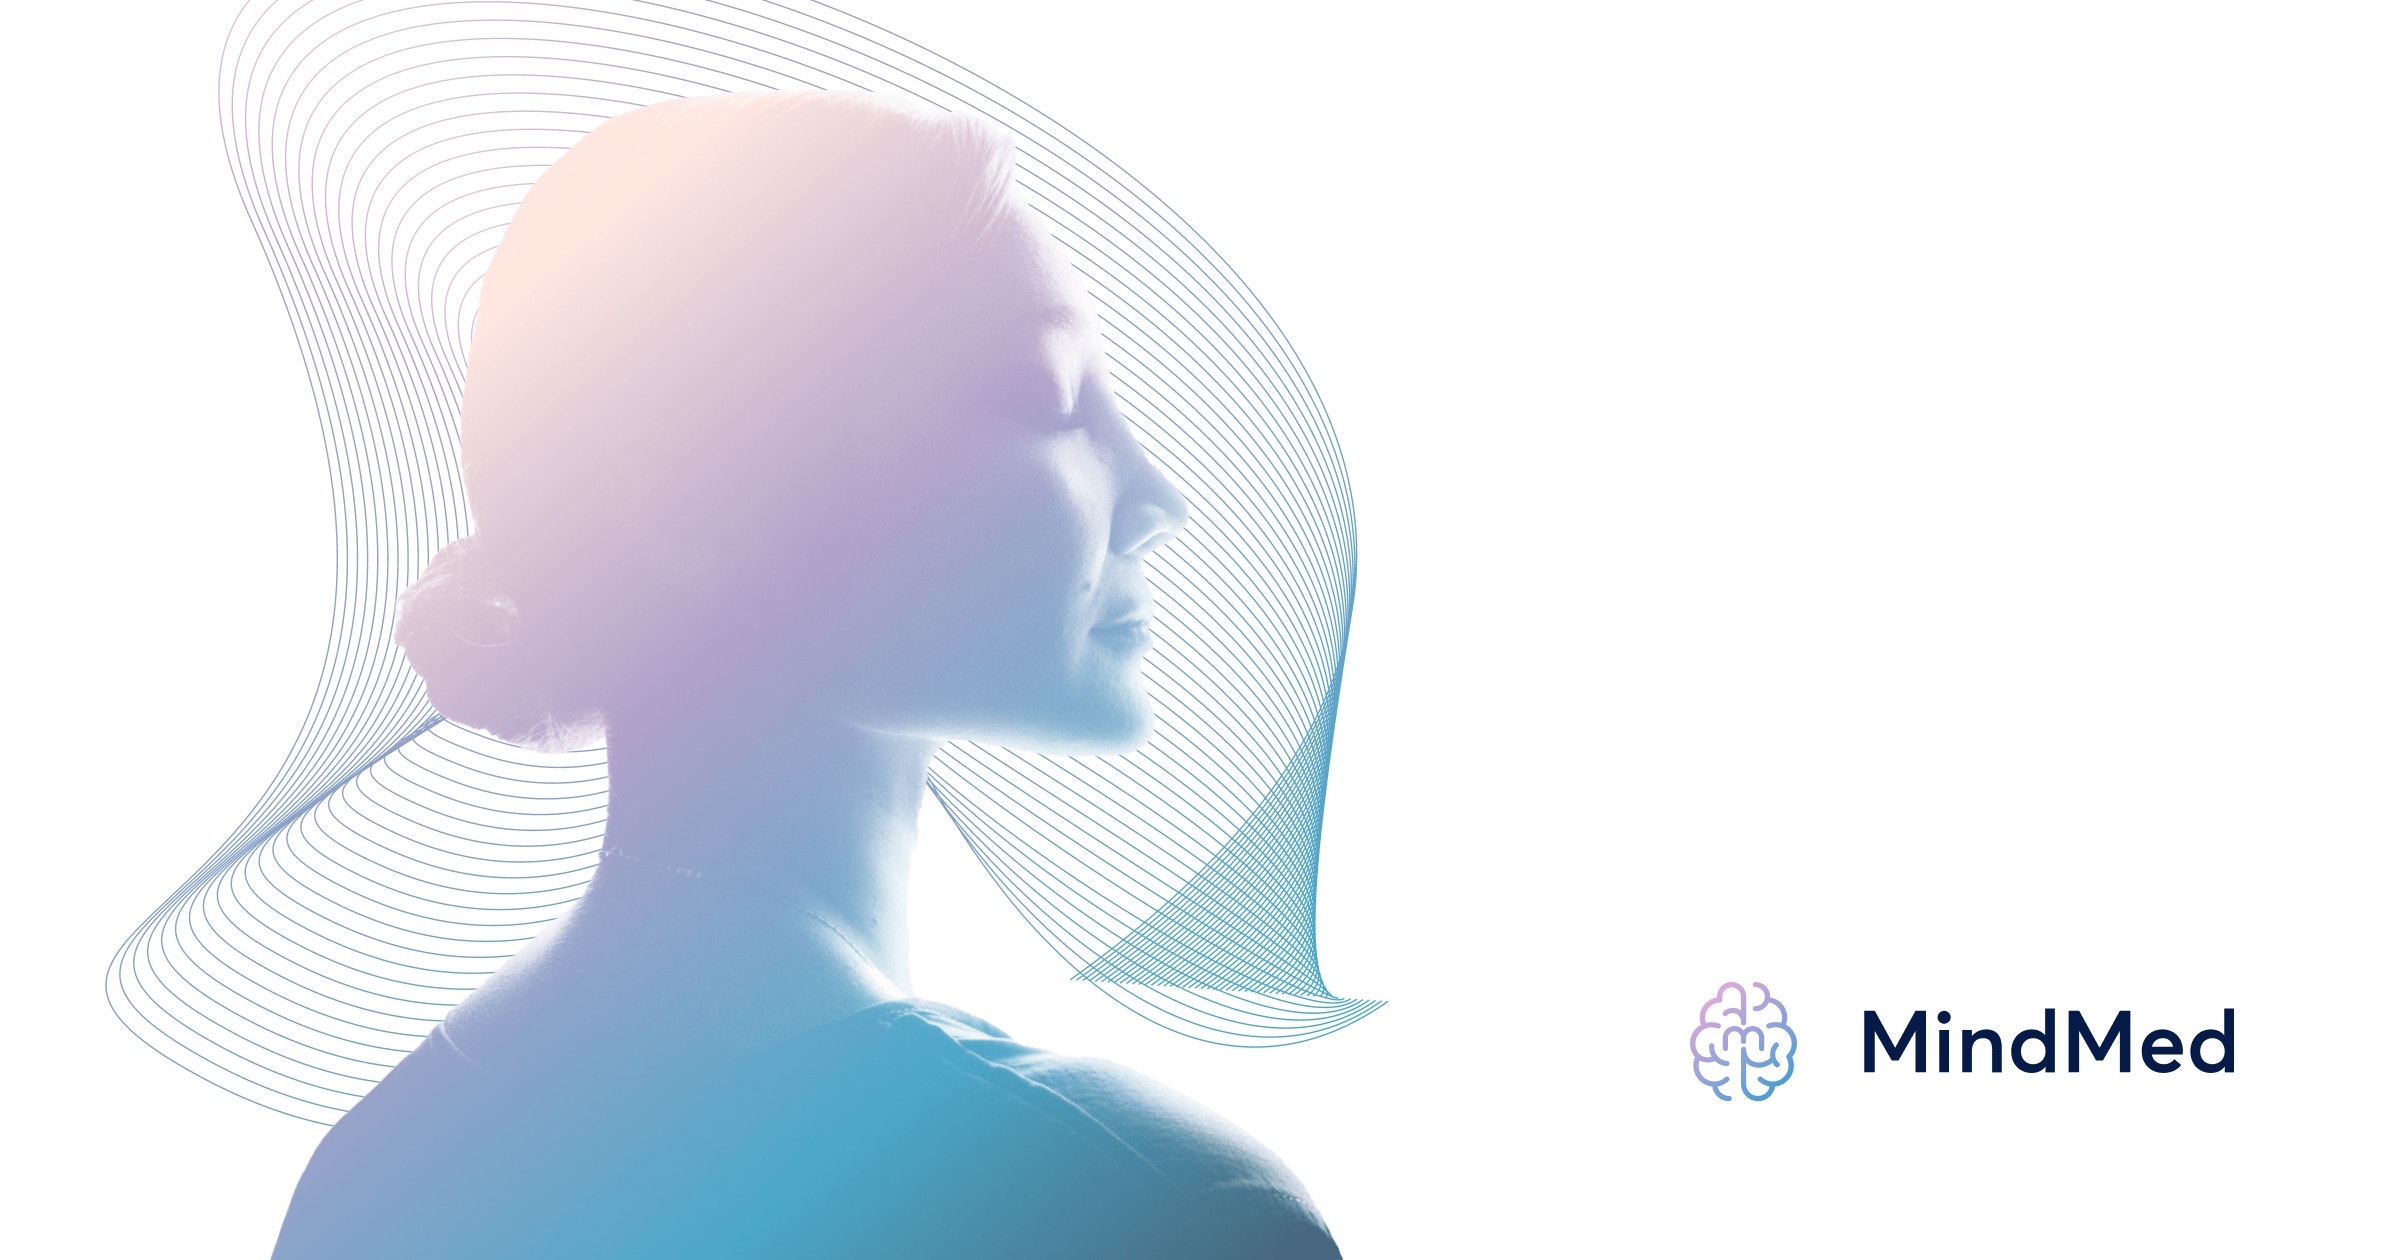 How MindMed Uses Tech To Innovate, Deploy Psychedelic Mental Health Therapies